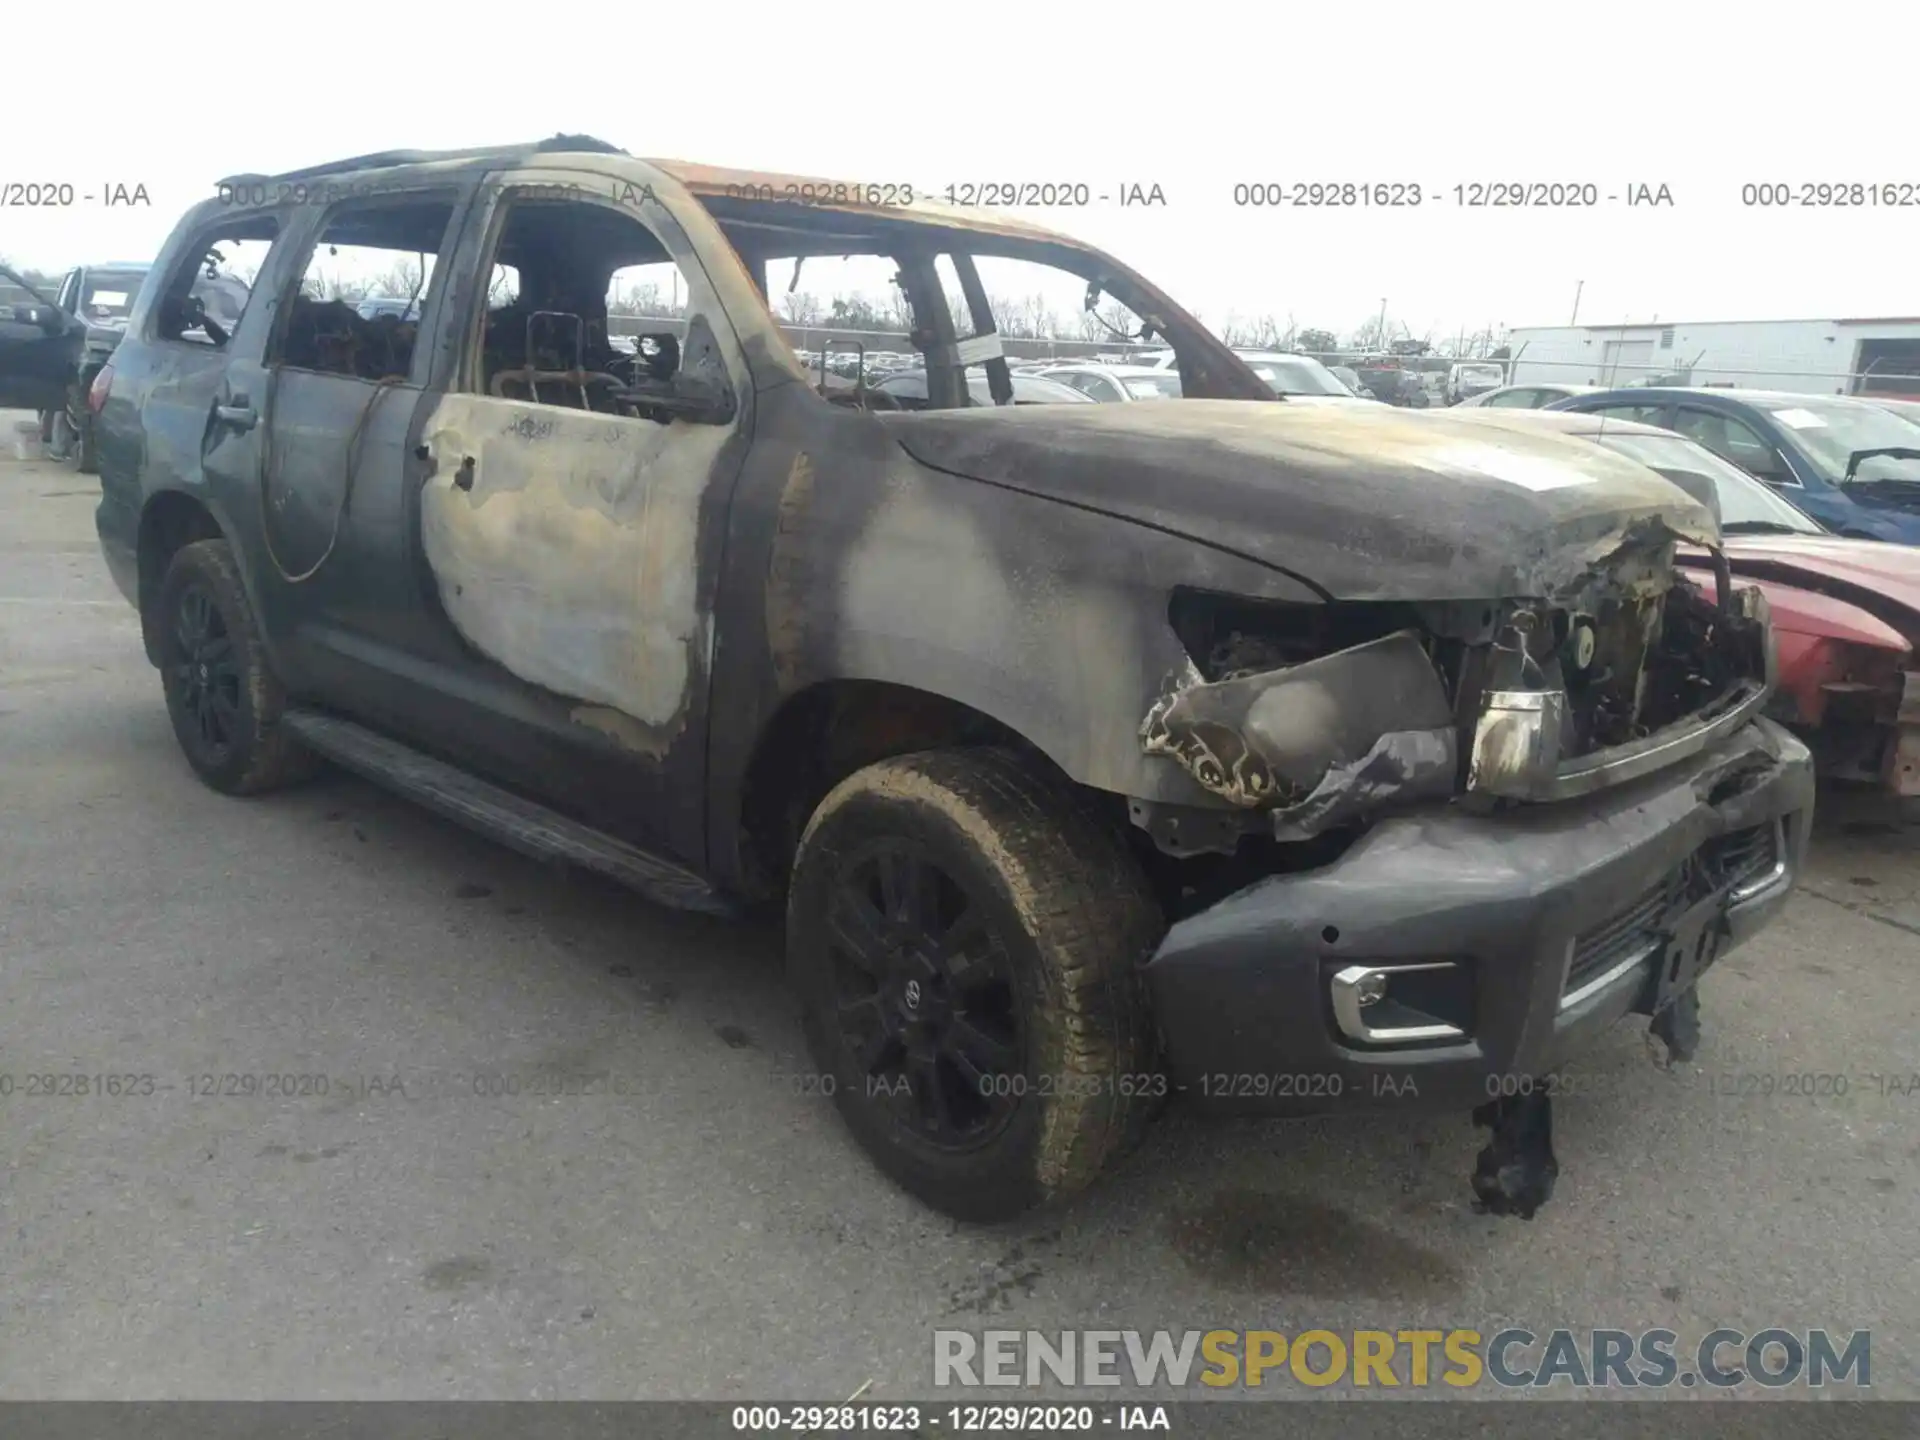 1 Photograph of a damaged car 5TDZY5G17LS074738 TOYOTA SEQUOIA 2020